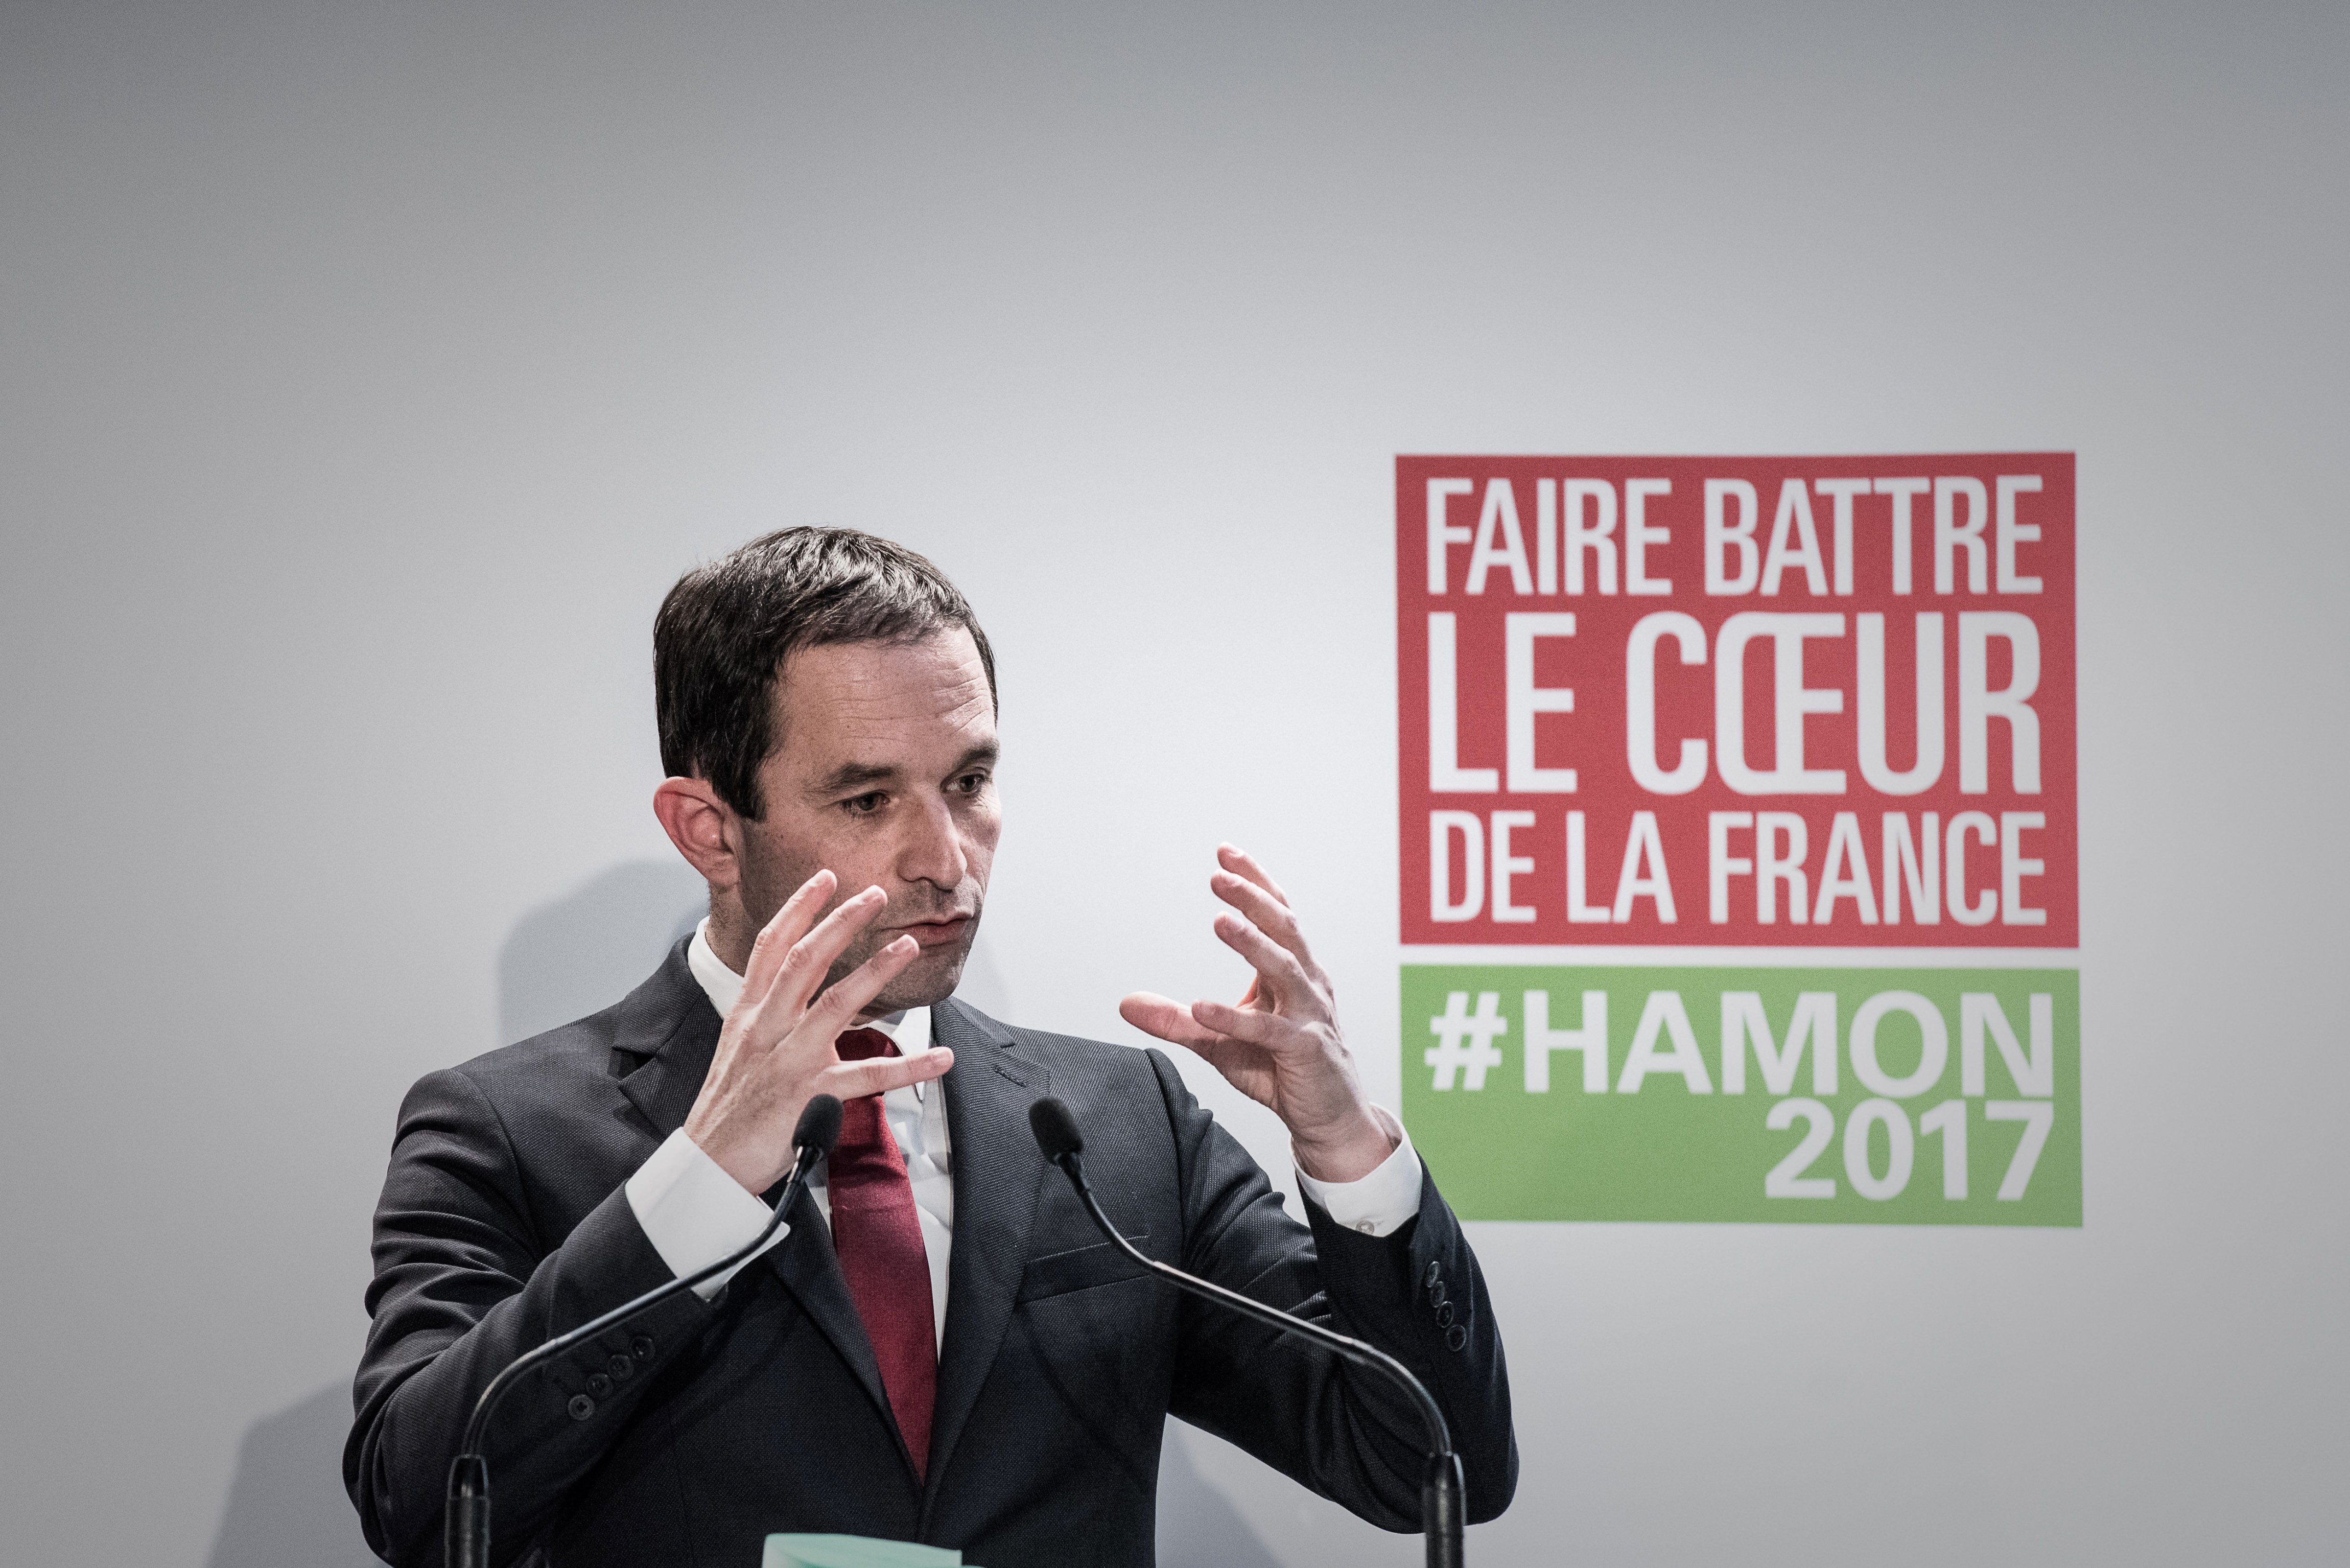 French Socialist Party presidential candidate, Benoit Hamon, speaks during a press conference following the inauguration of his campaign headquarters on February 11, 2017 in Paris. (Philippe Lopez—AFP/Getty Images)